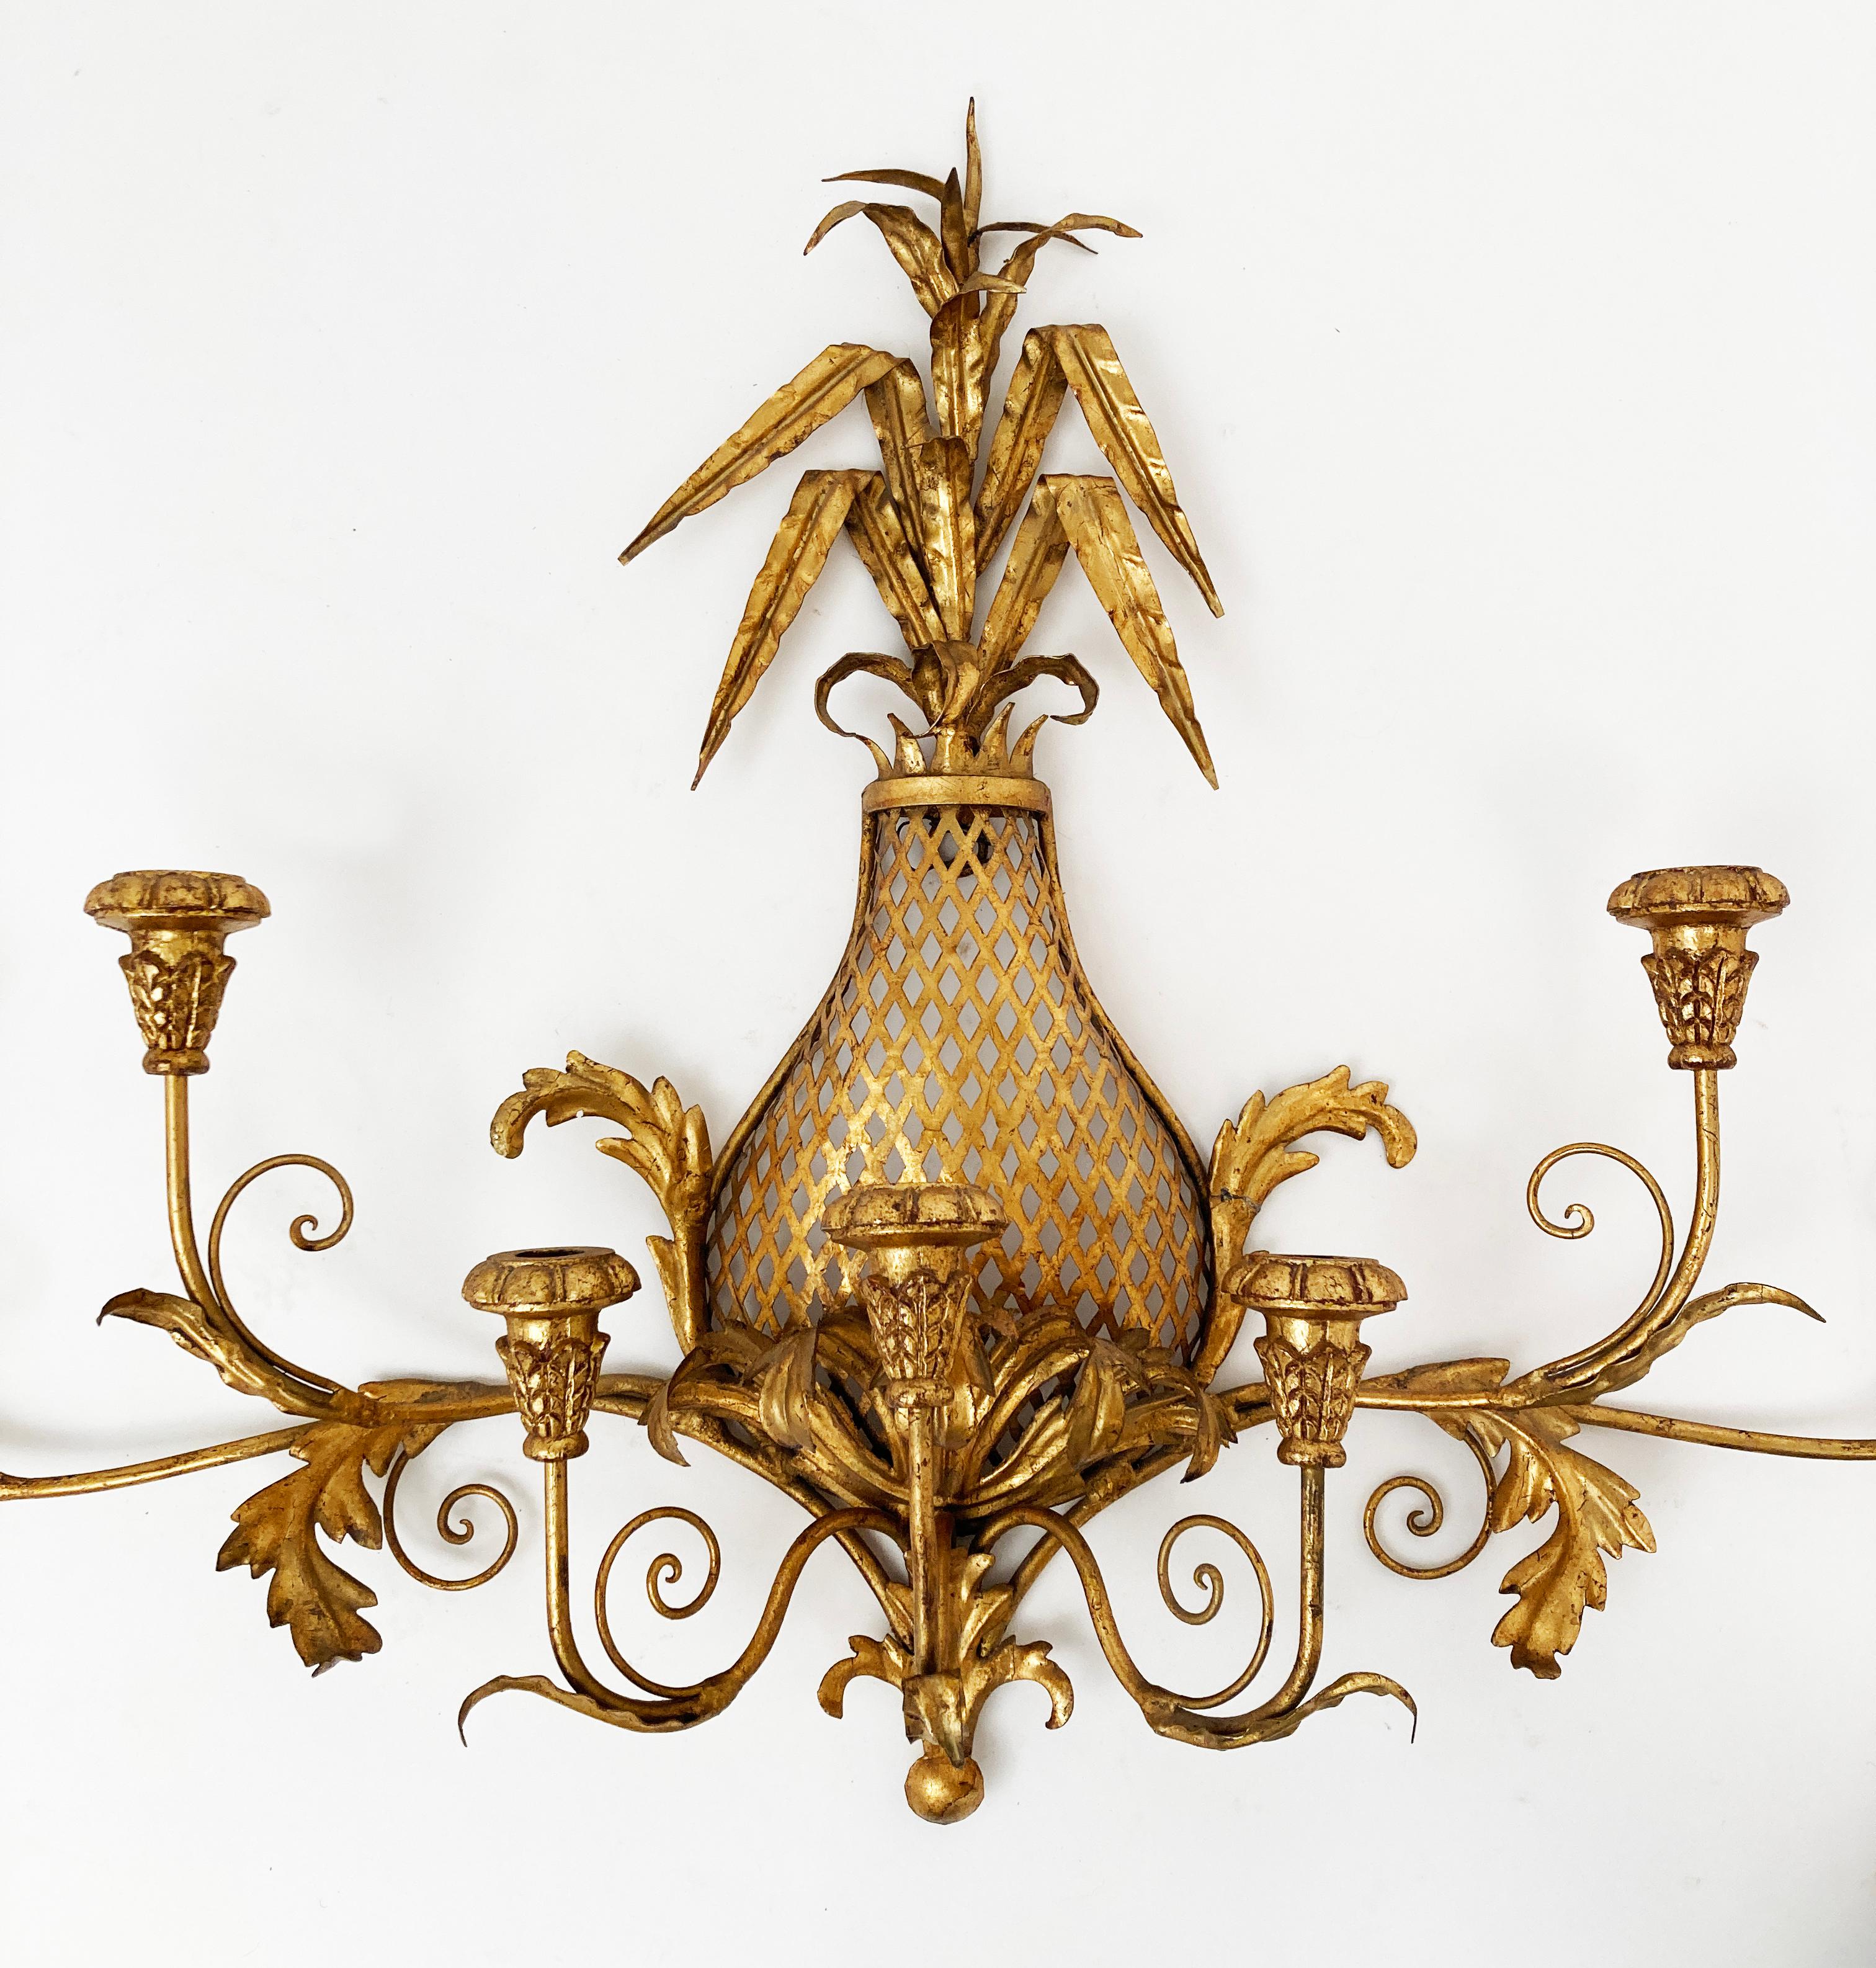 This Hollywood Regency 7-candleholder and pineapple wall sconce is reminiscent of mid 20th century Hollywood when everything was golden! The design of this piece is a perfect balance of ornate leaf work and beautiful French era scroll work that